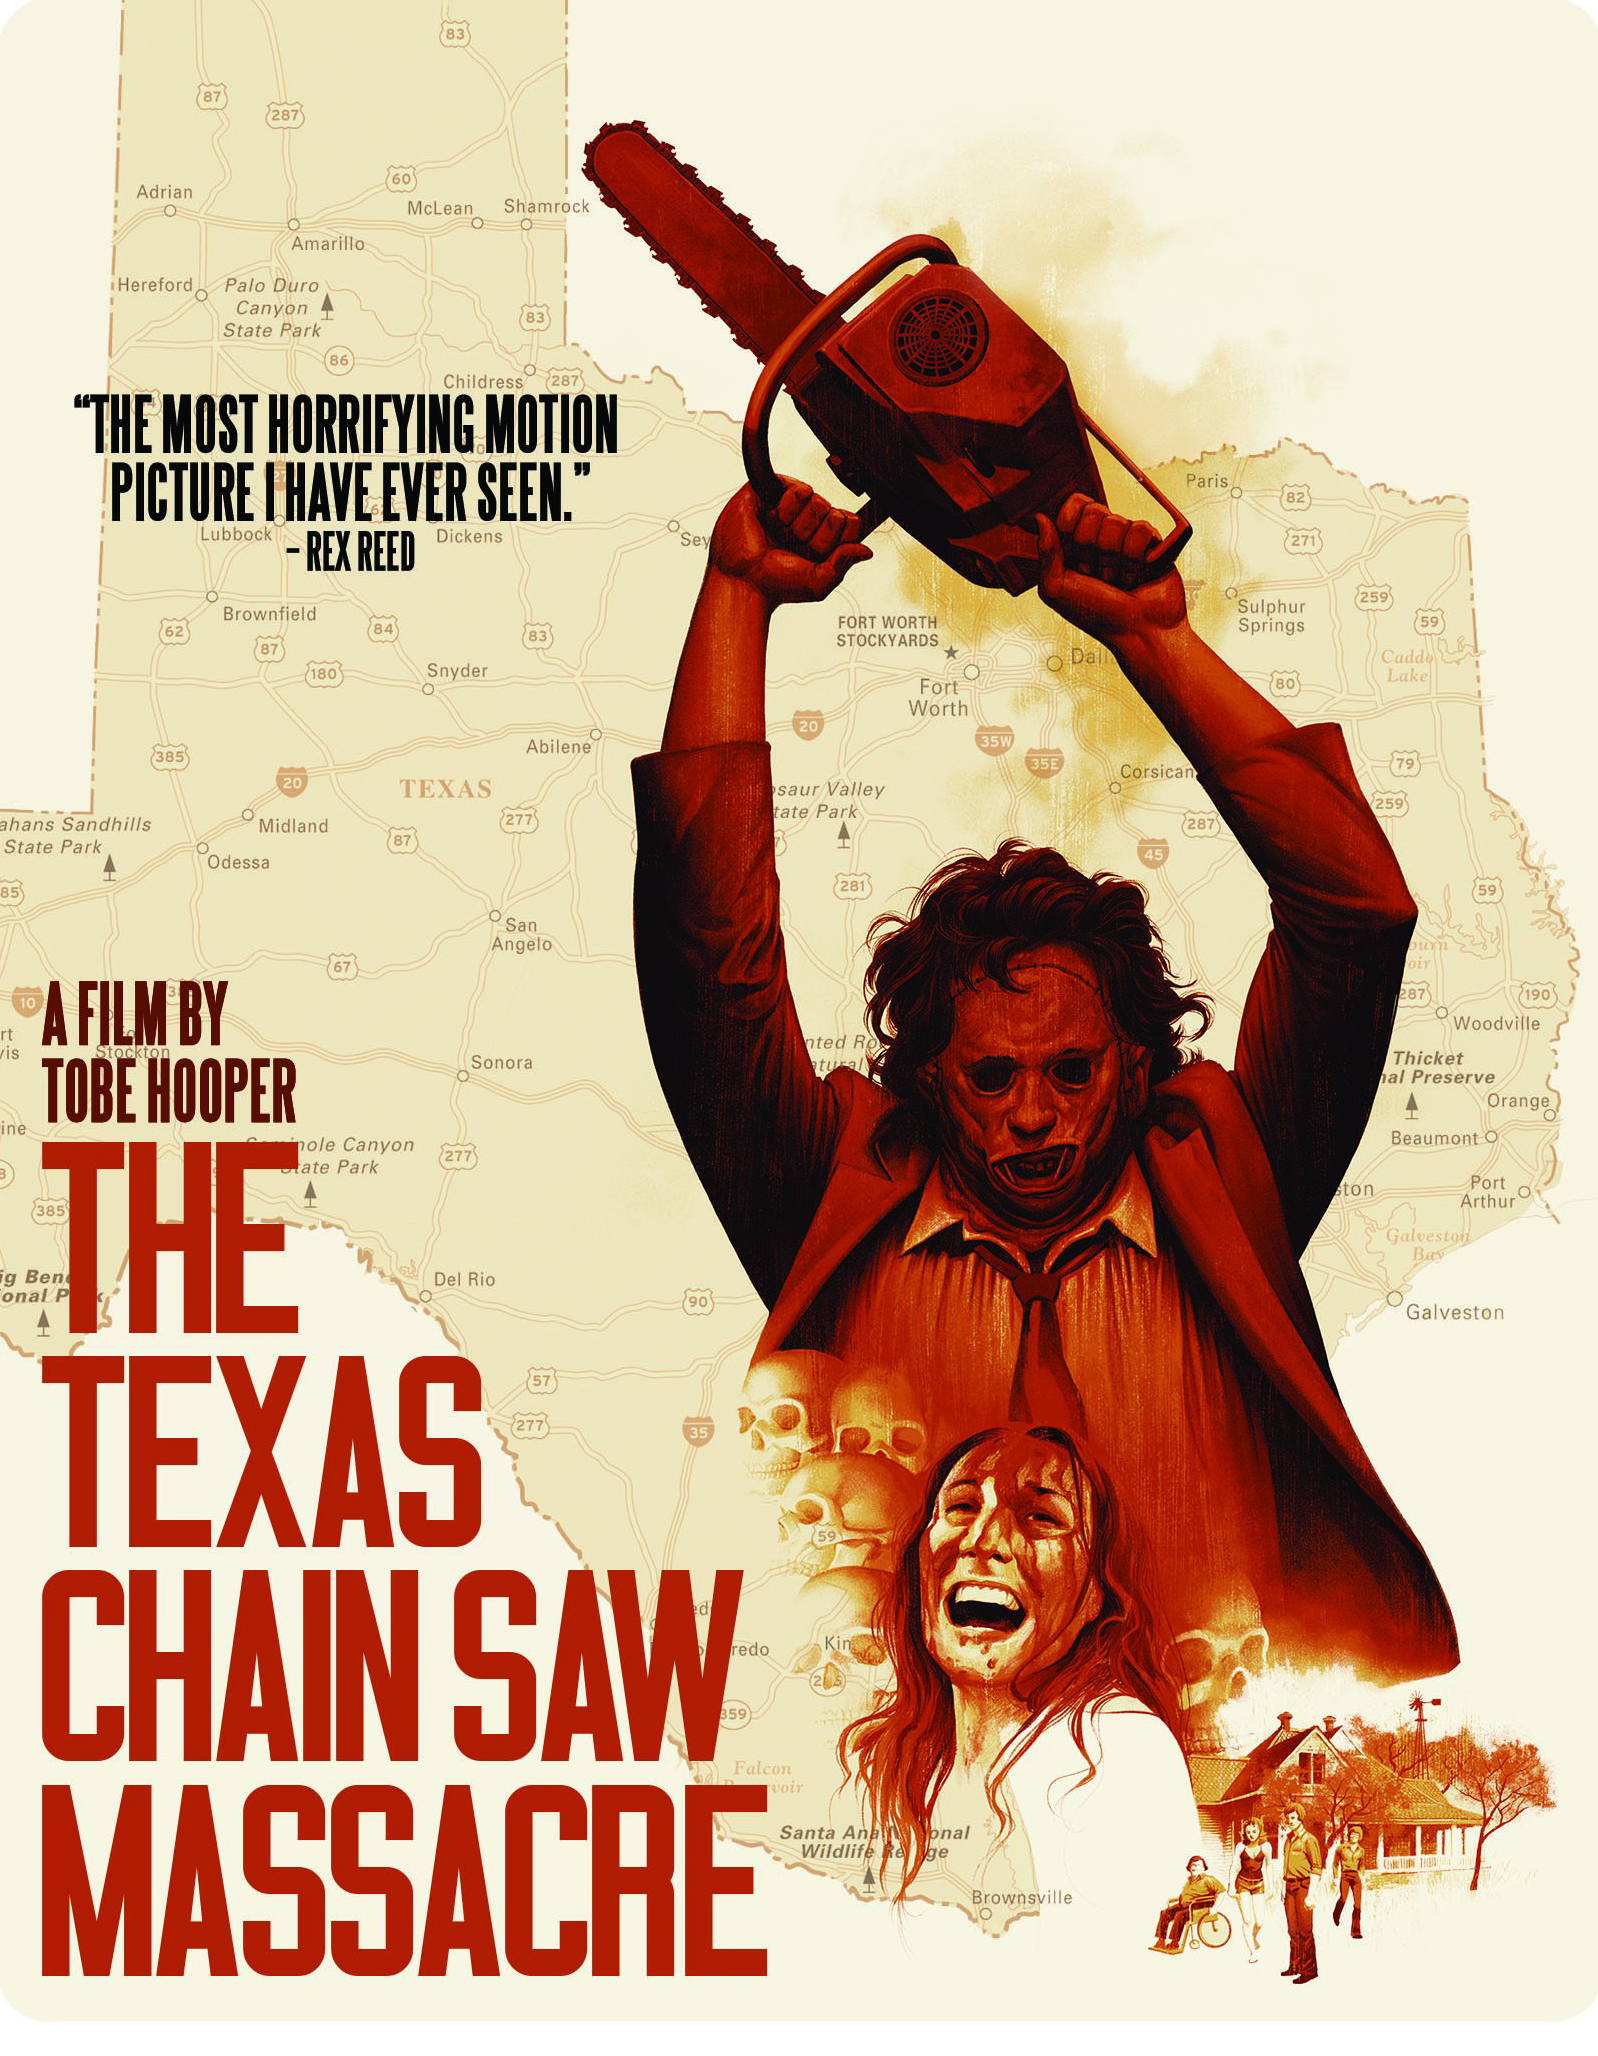 Fucked-Up Films #8: The Texas Chainsaw Massacre (1974)